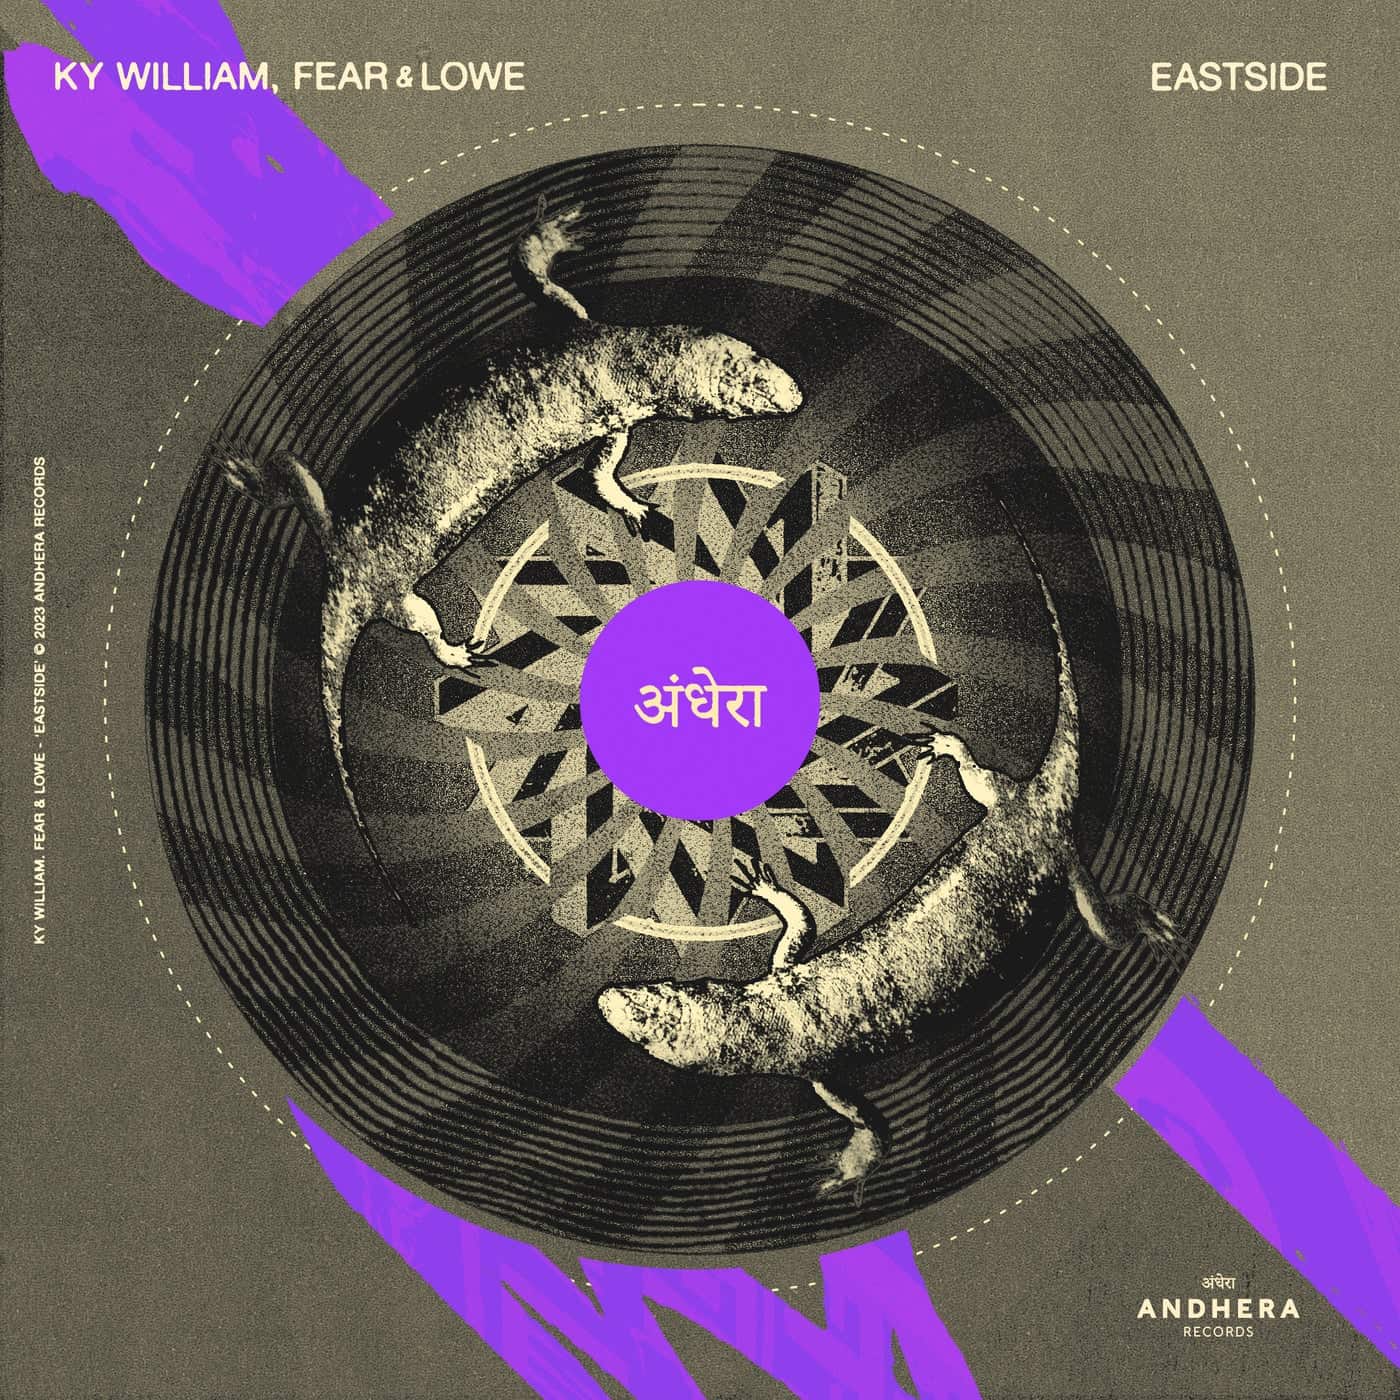 image cover: Fear & Lowe, Ky William - Eastside on Andhera Records